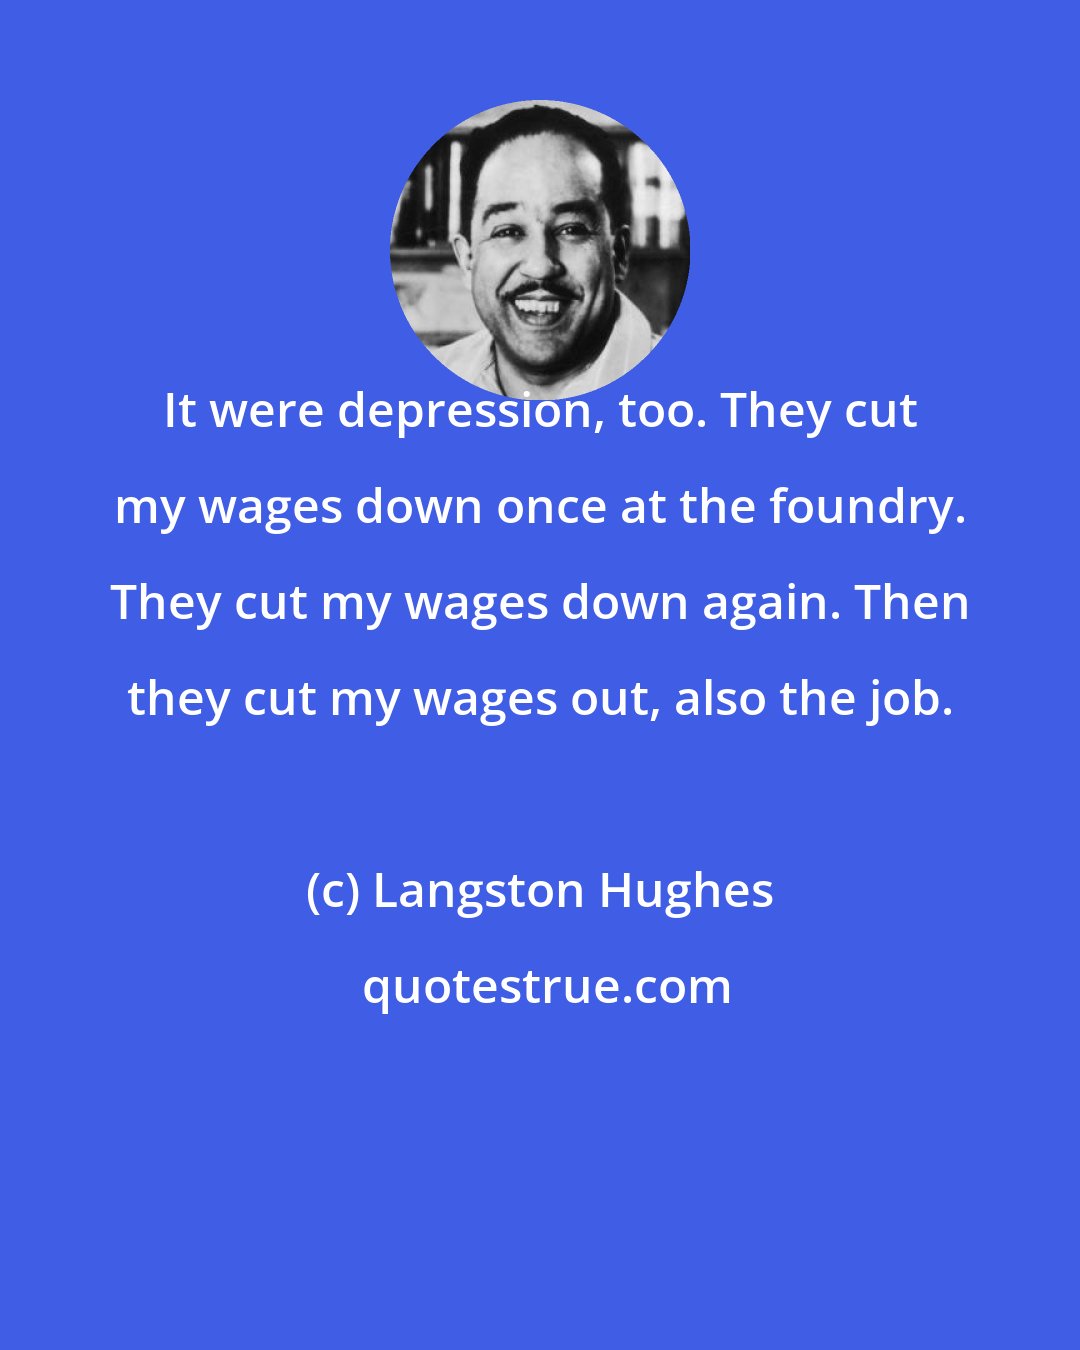 Langston Hughes: It were depression, too. They cut my wages down once at the foundry. They cut my wages down again. Then they cut my wages out, also the job.